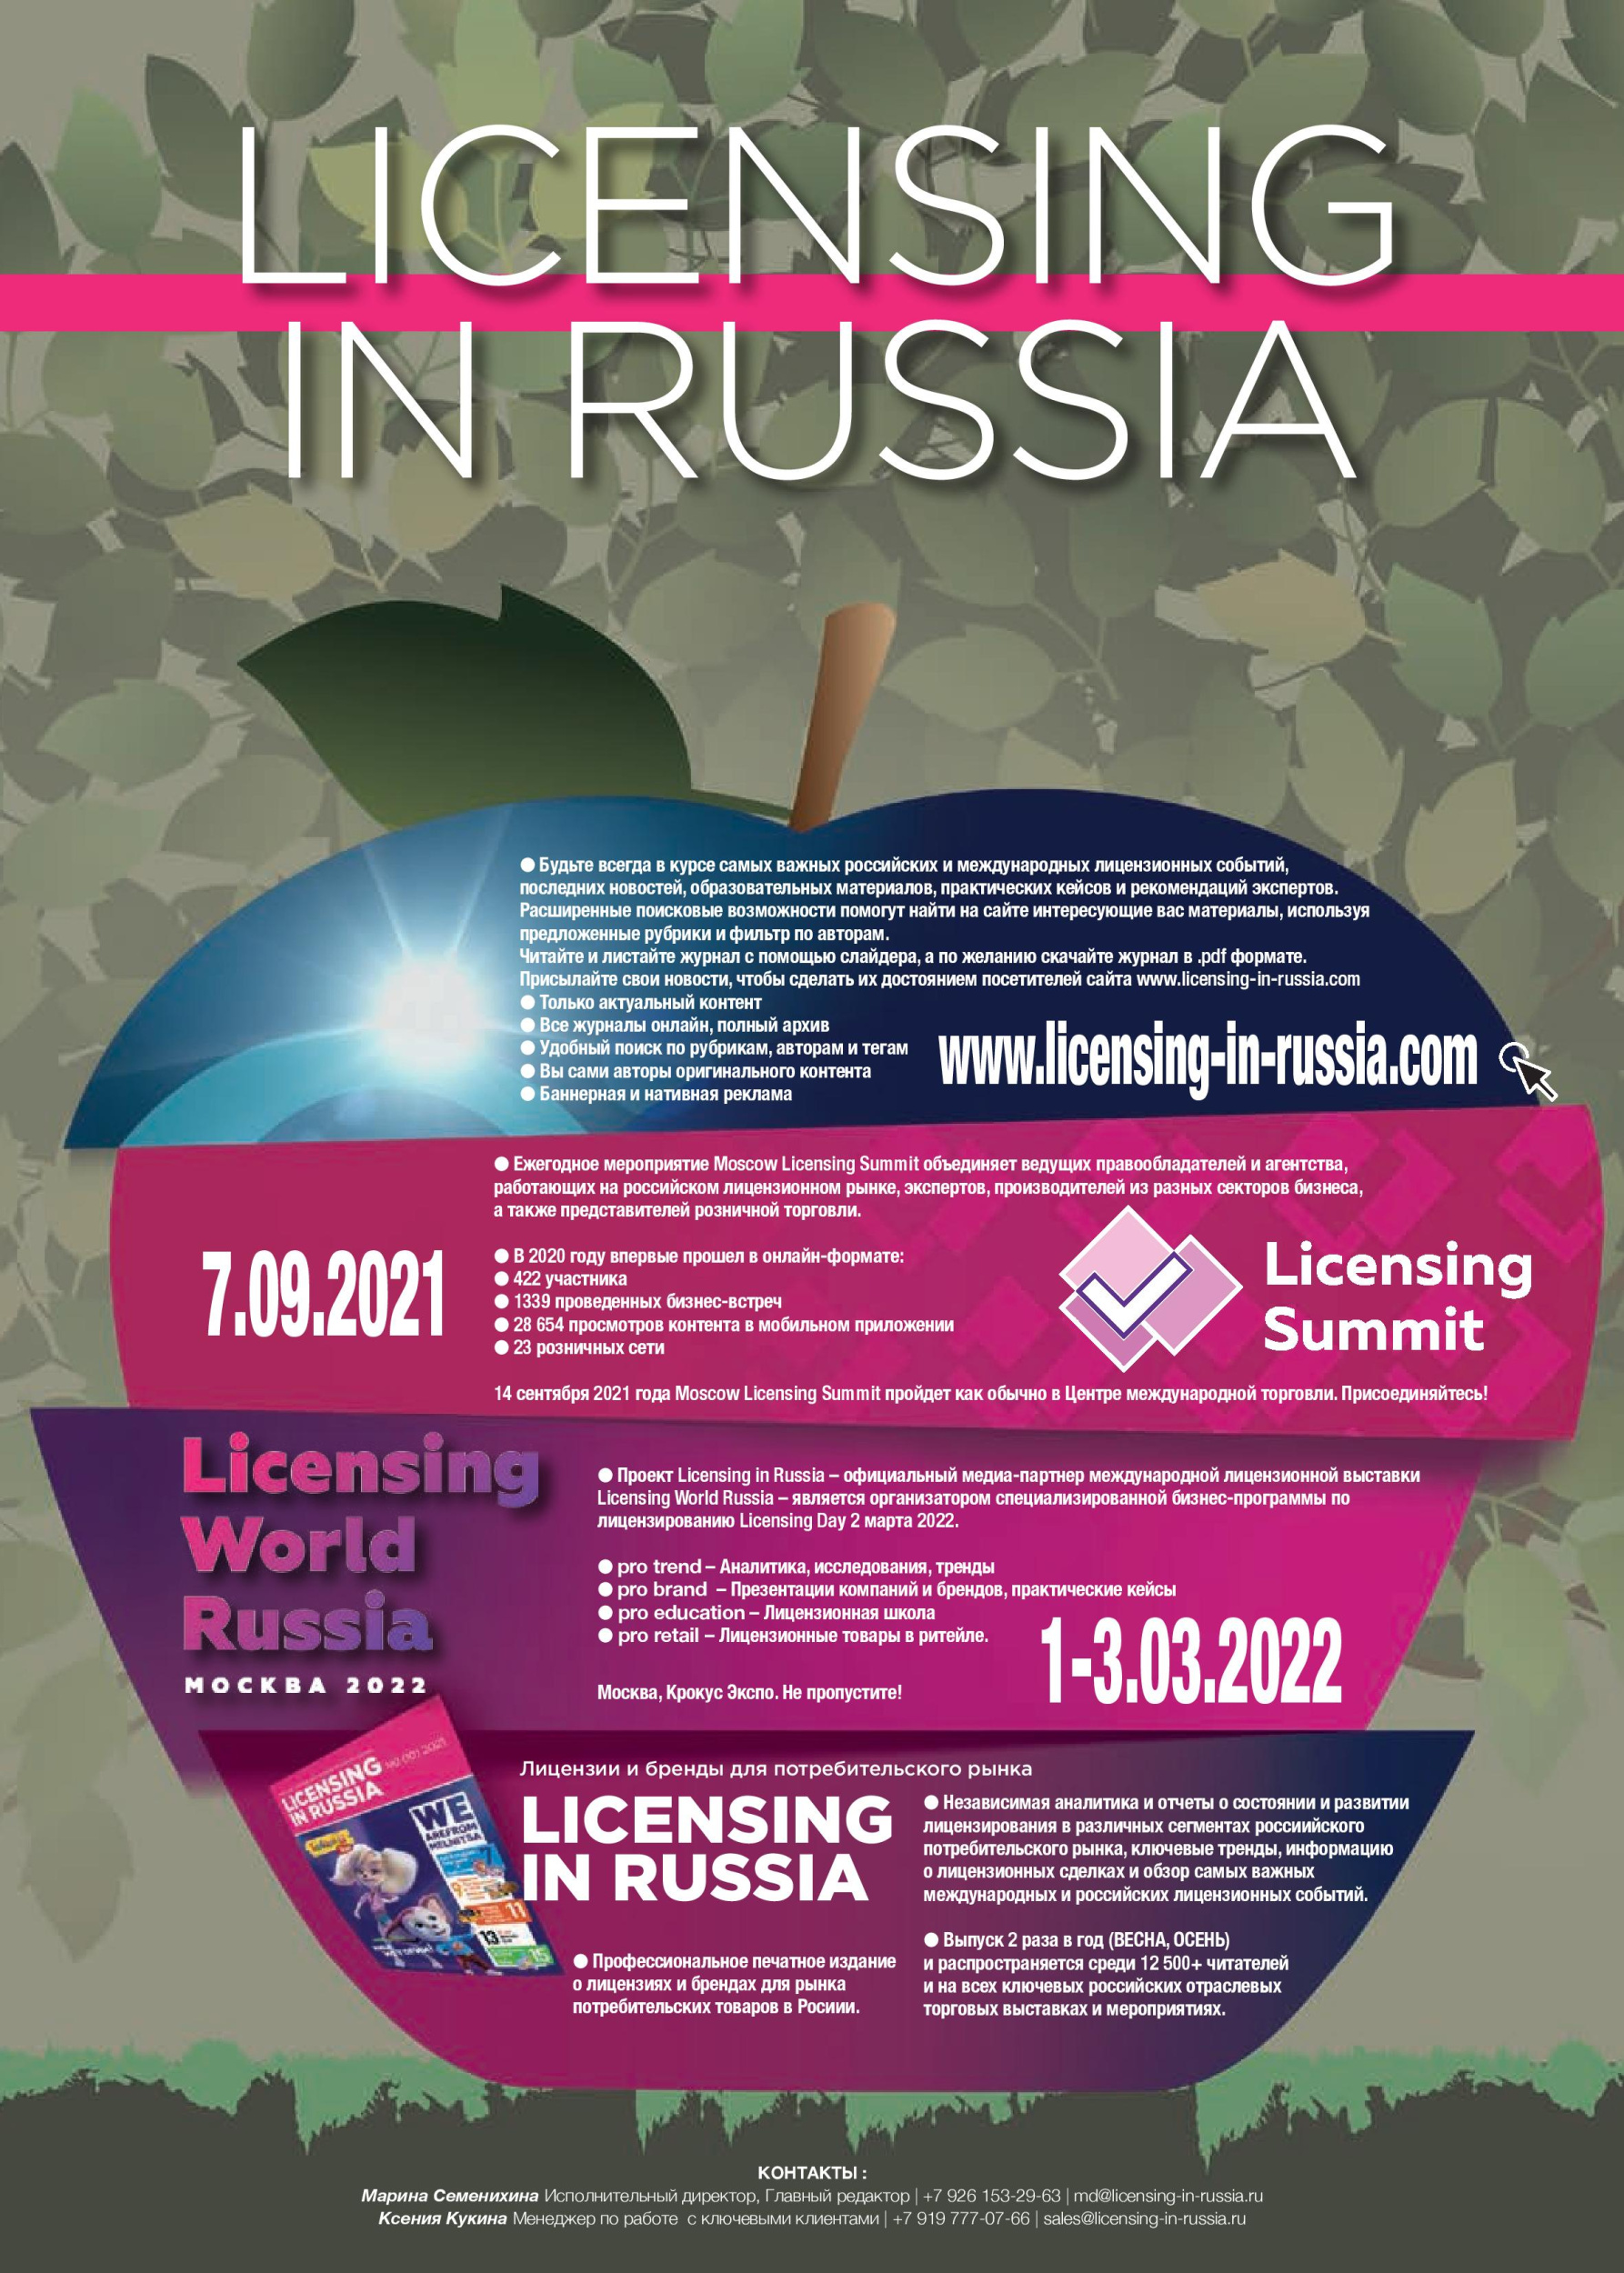 Licensing in Russia